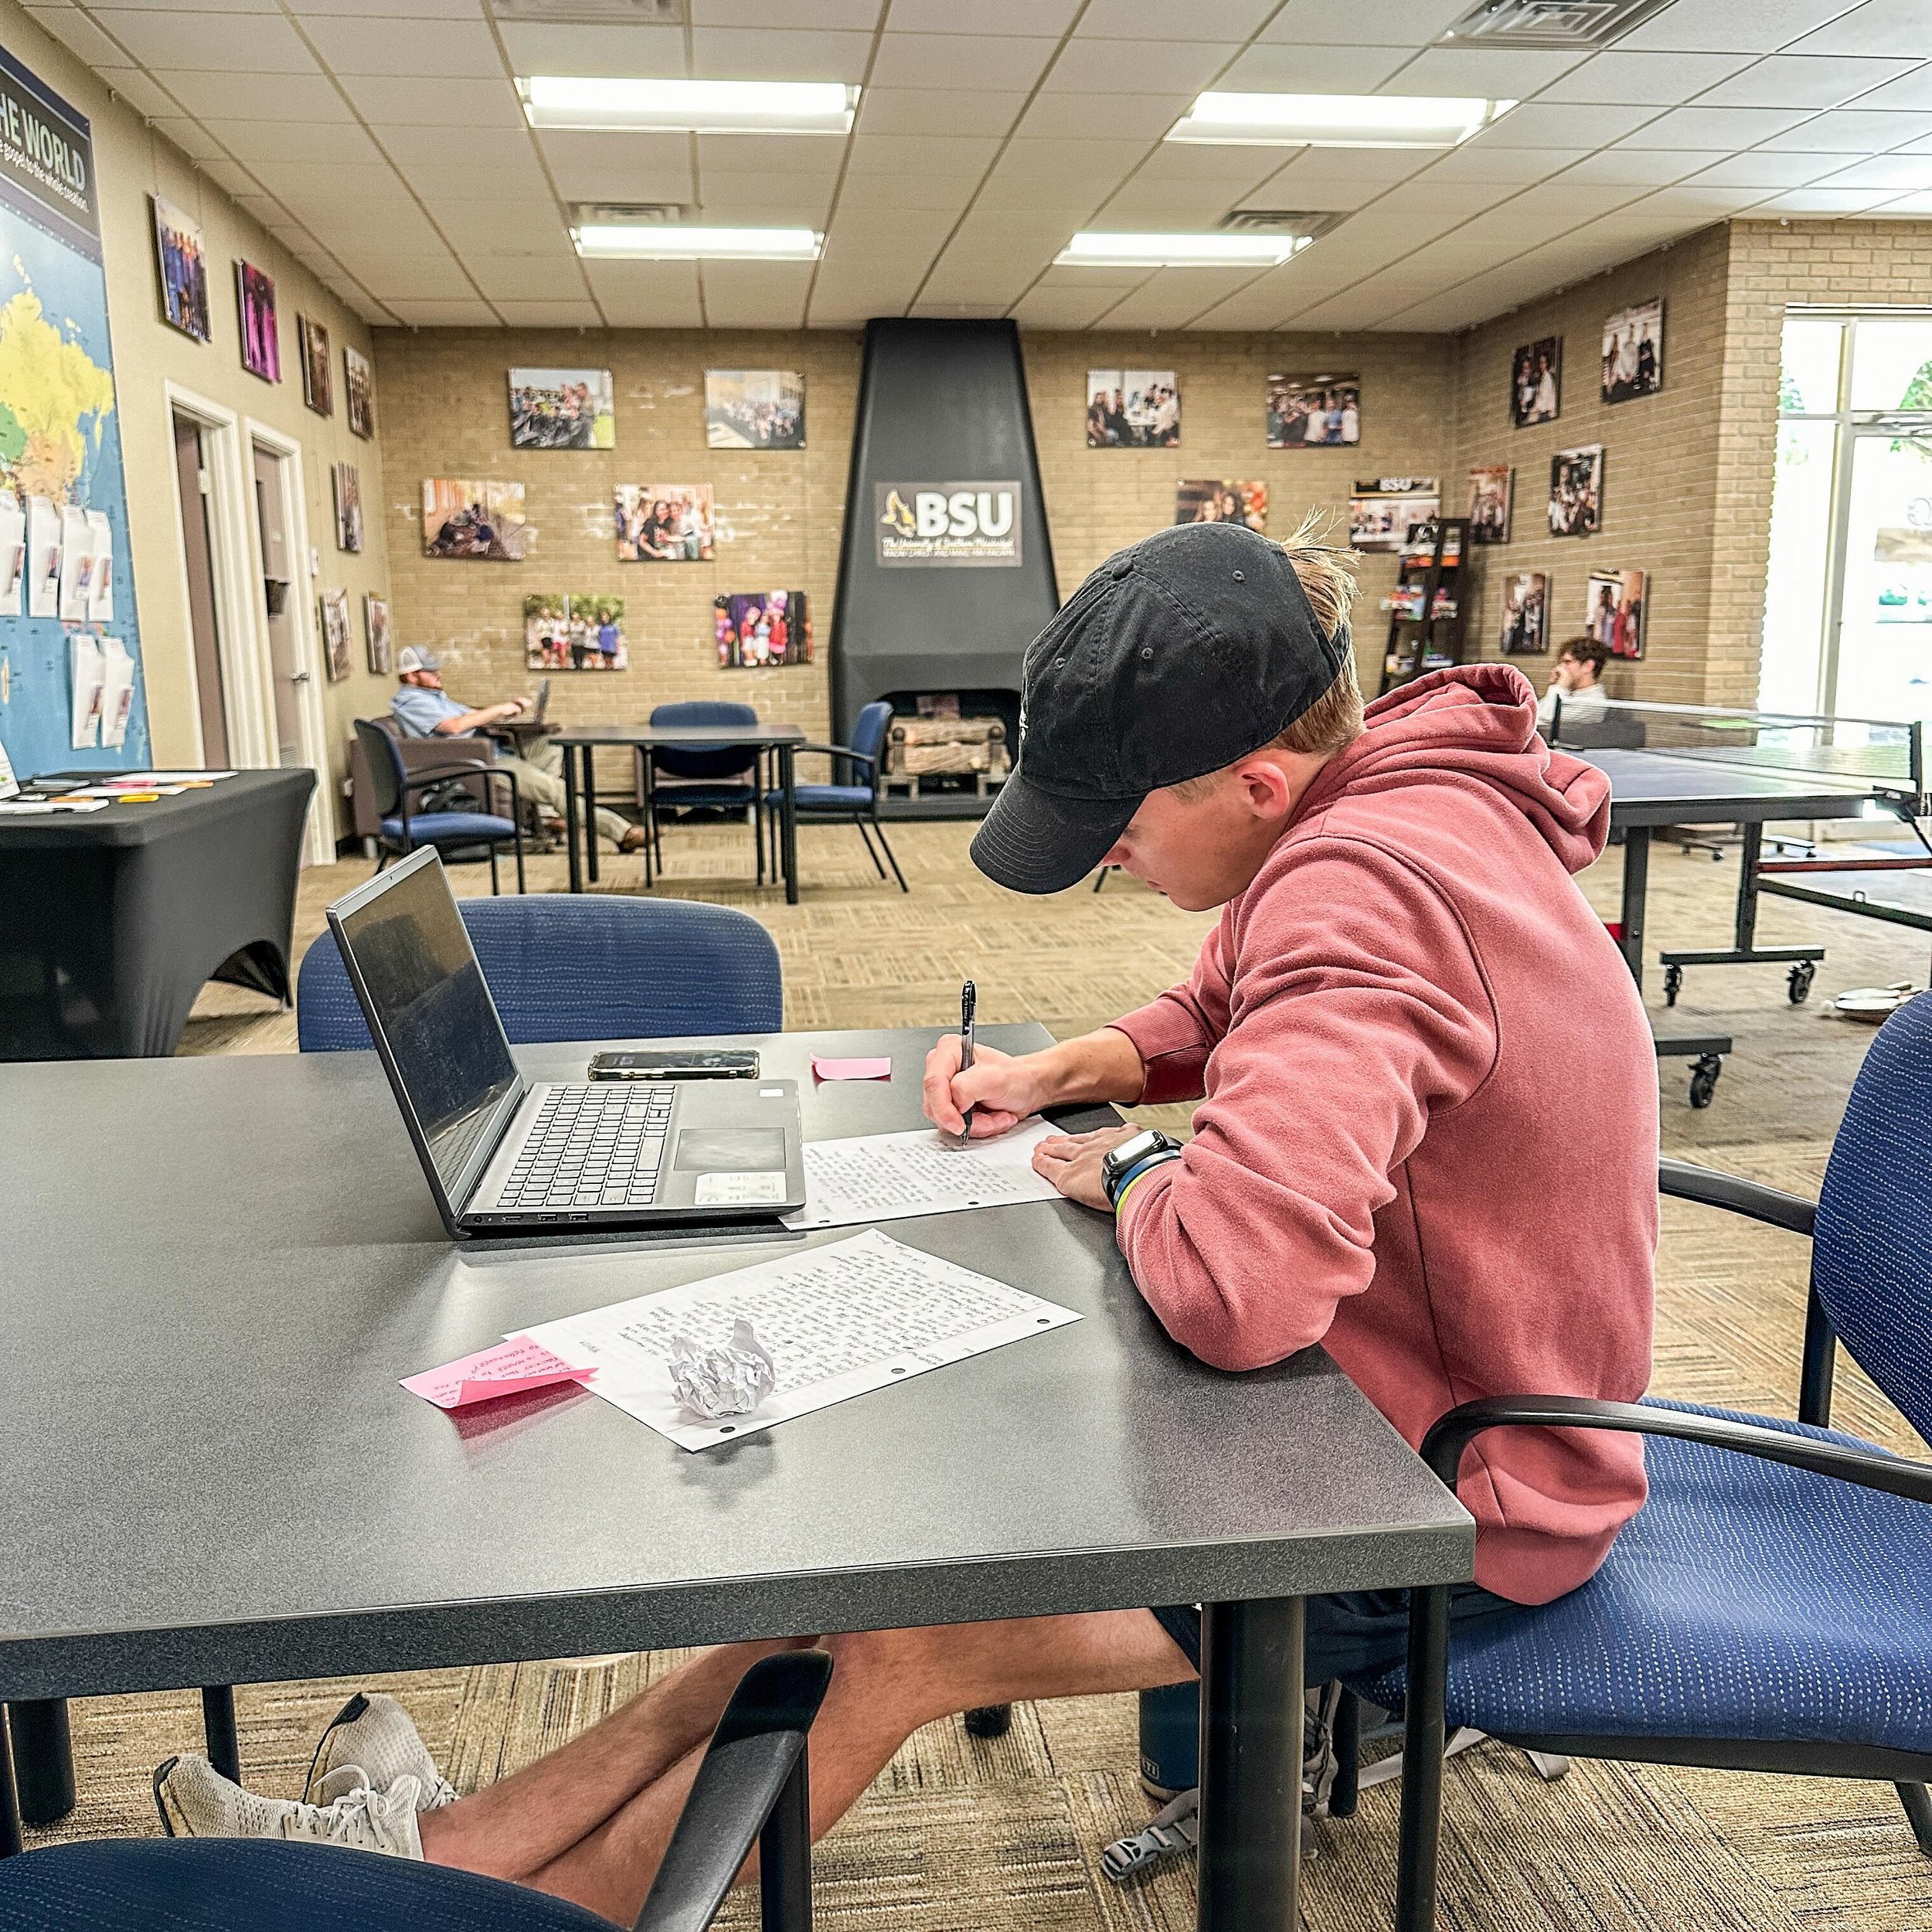 Don&rsquo;t be a sluggard when it comes to preparing for your finals! If you need a place to study the BSU will be open  on weekdays throughout finals. Happy studying!

The soul of the sluggard craves and gets nothing, while the soul of the diligent 